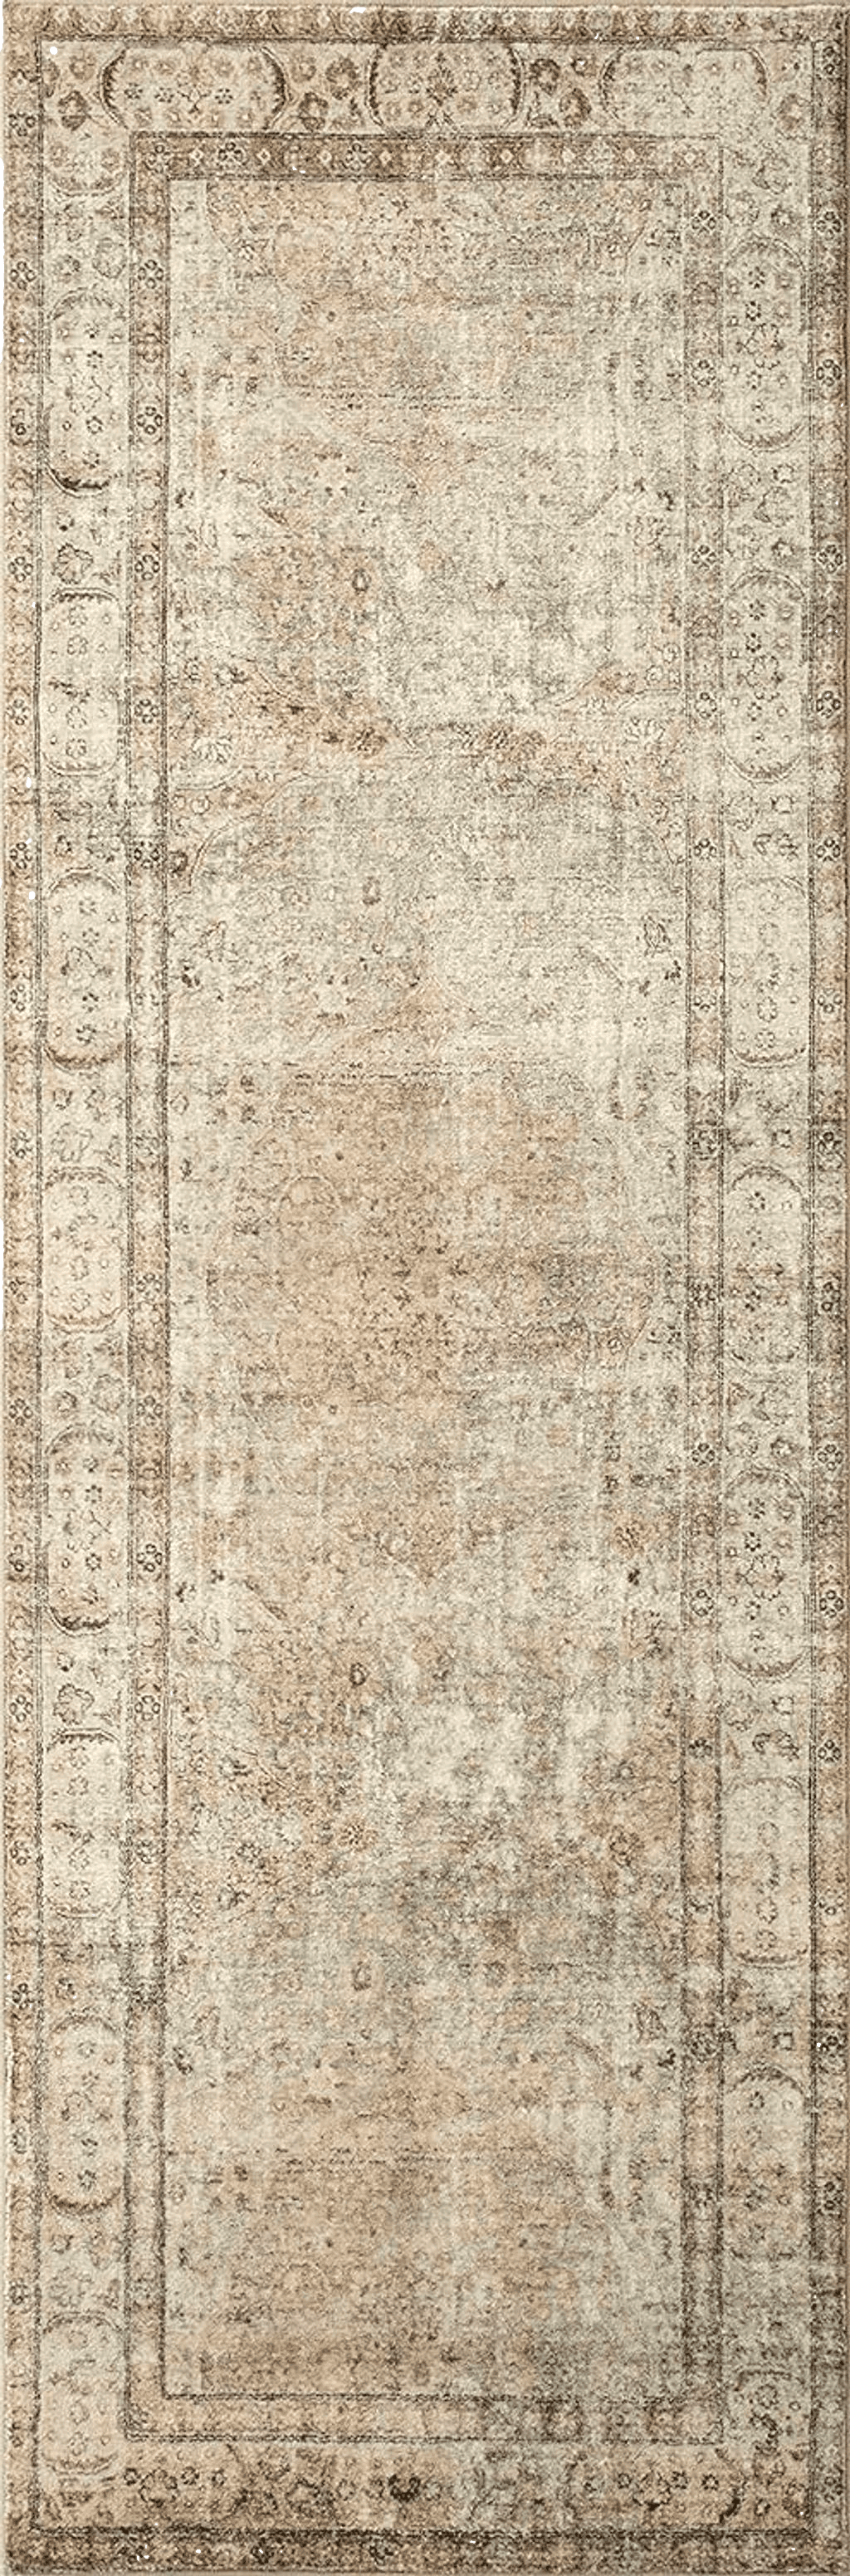 Loloi II Margot Collection MAT-01 Antique/Sage 5'-0" x 7'-6" Area Rug feat. CloudPile